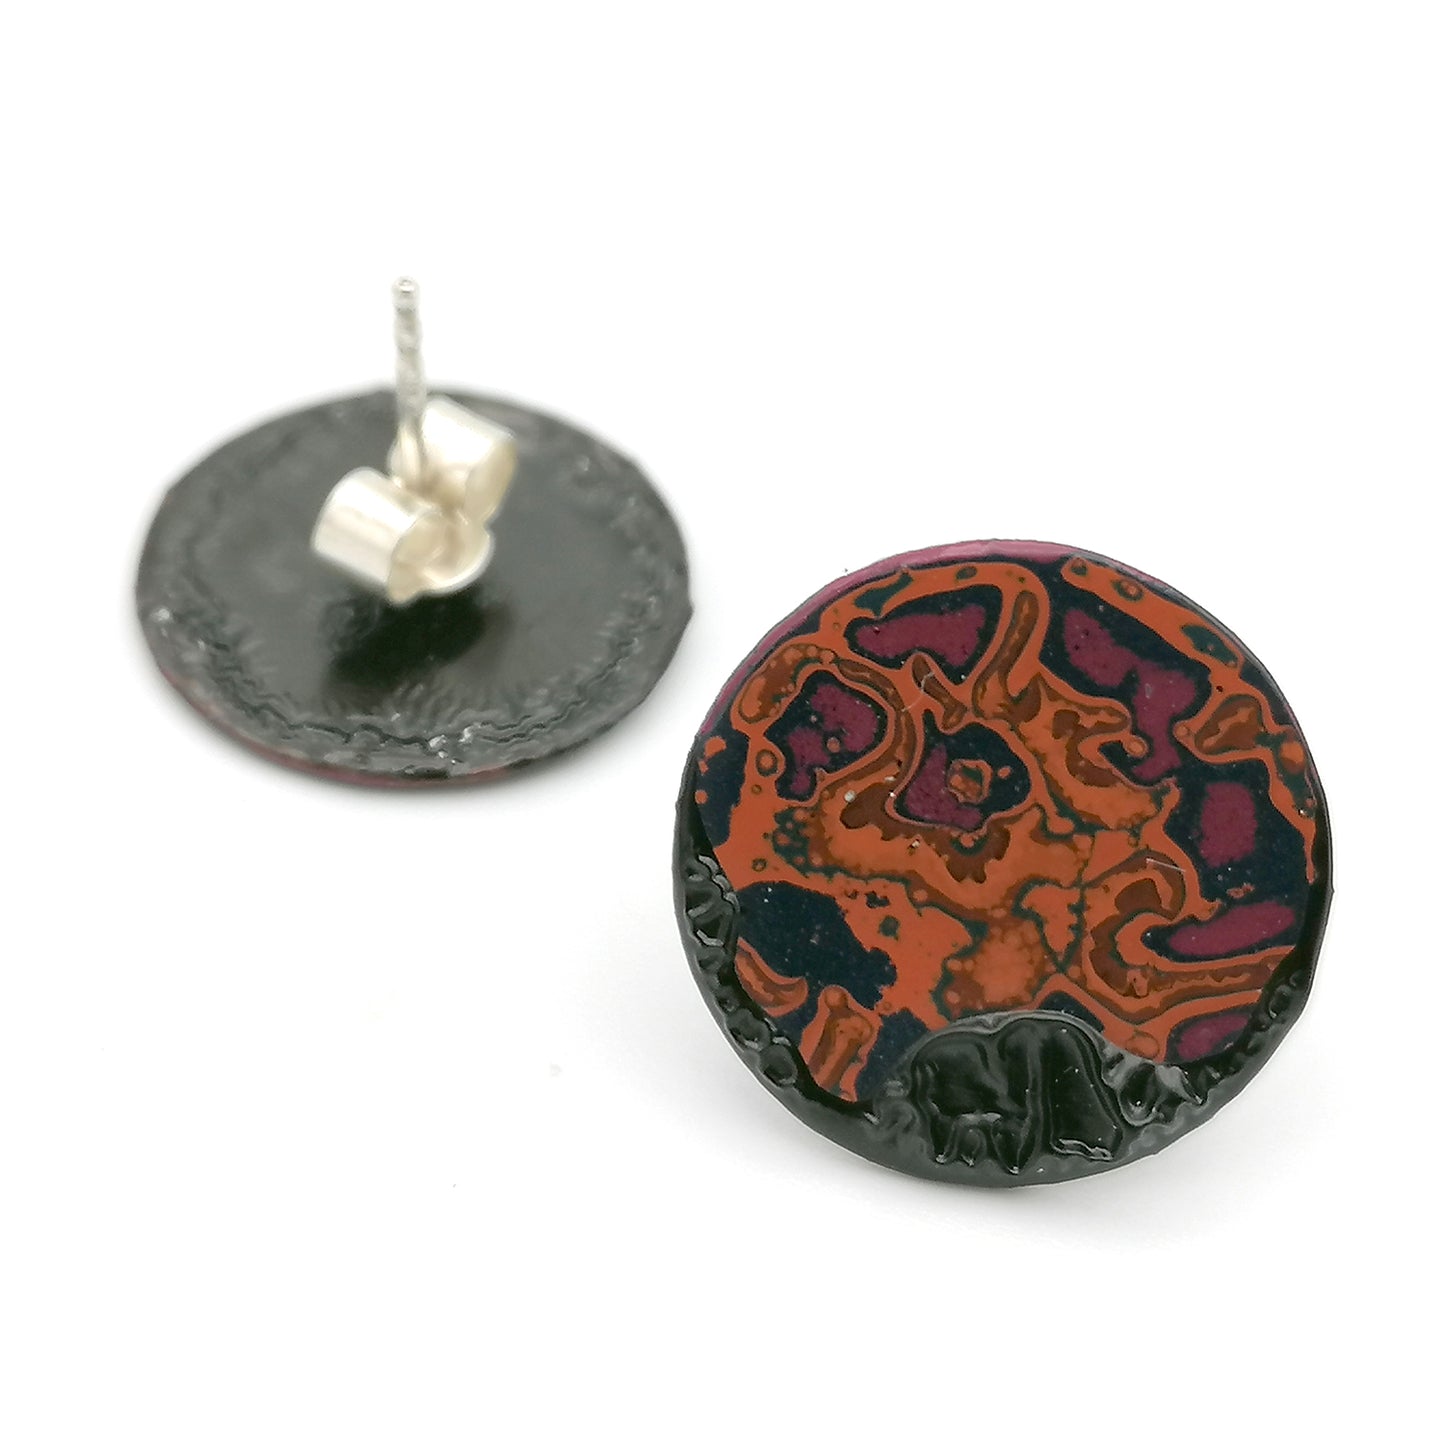 Image shows a pair of small circle stud earrings on a white background, the second of which is upside down showing the sterling silver earring post. An abstract pattern in pink, orange and blue.